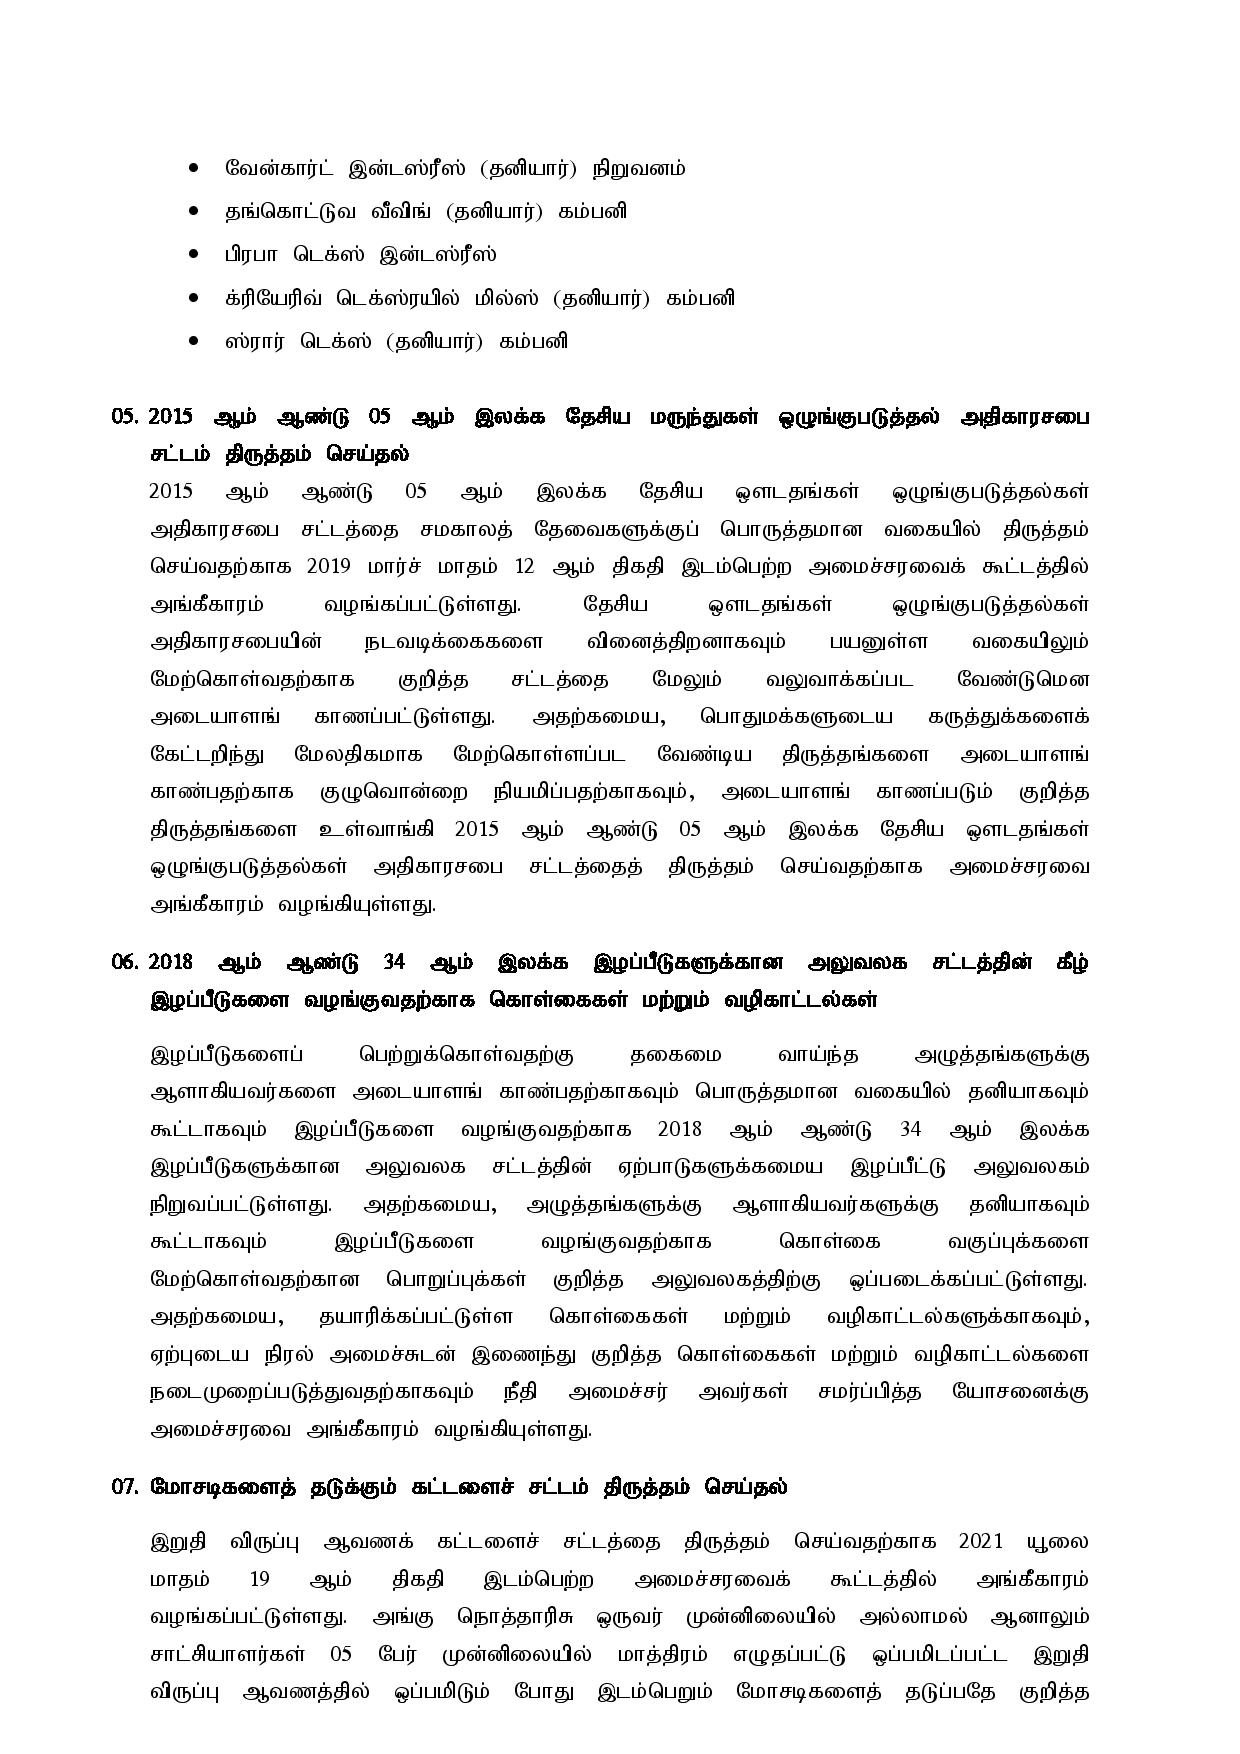 Cabinet Decision on 17.08.2021 Tamil page 003